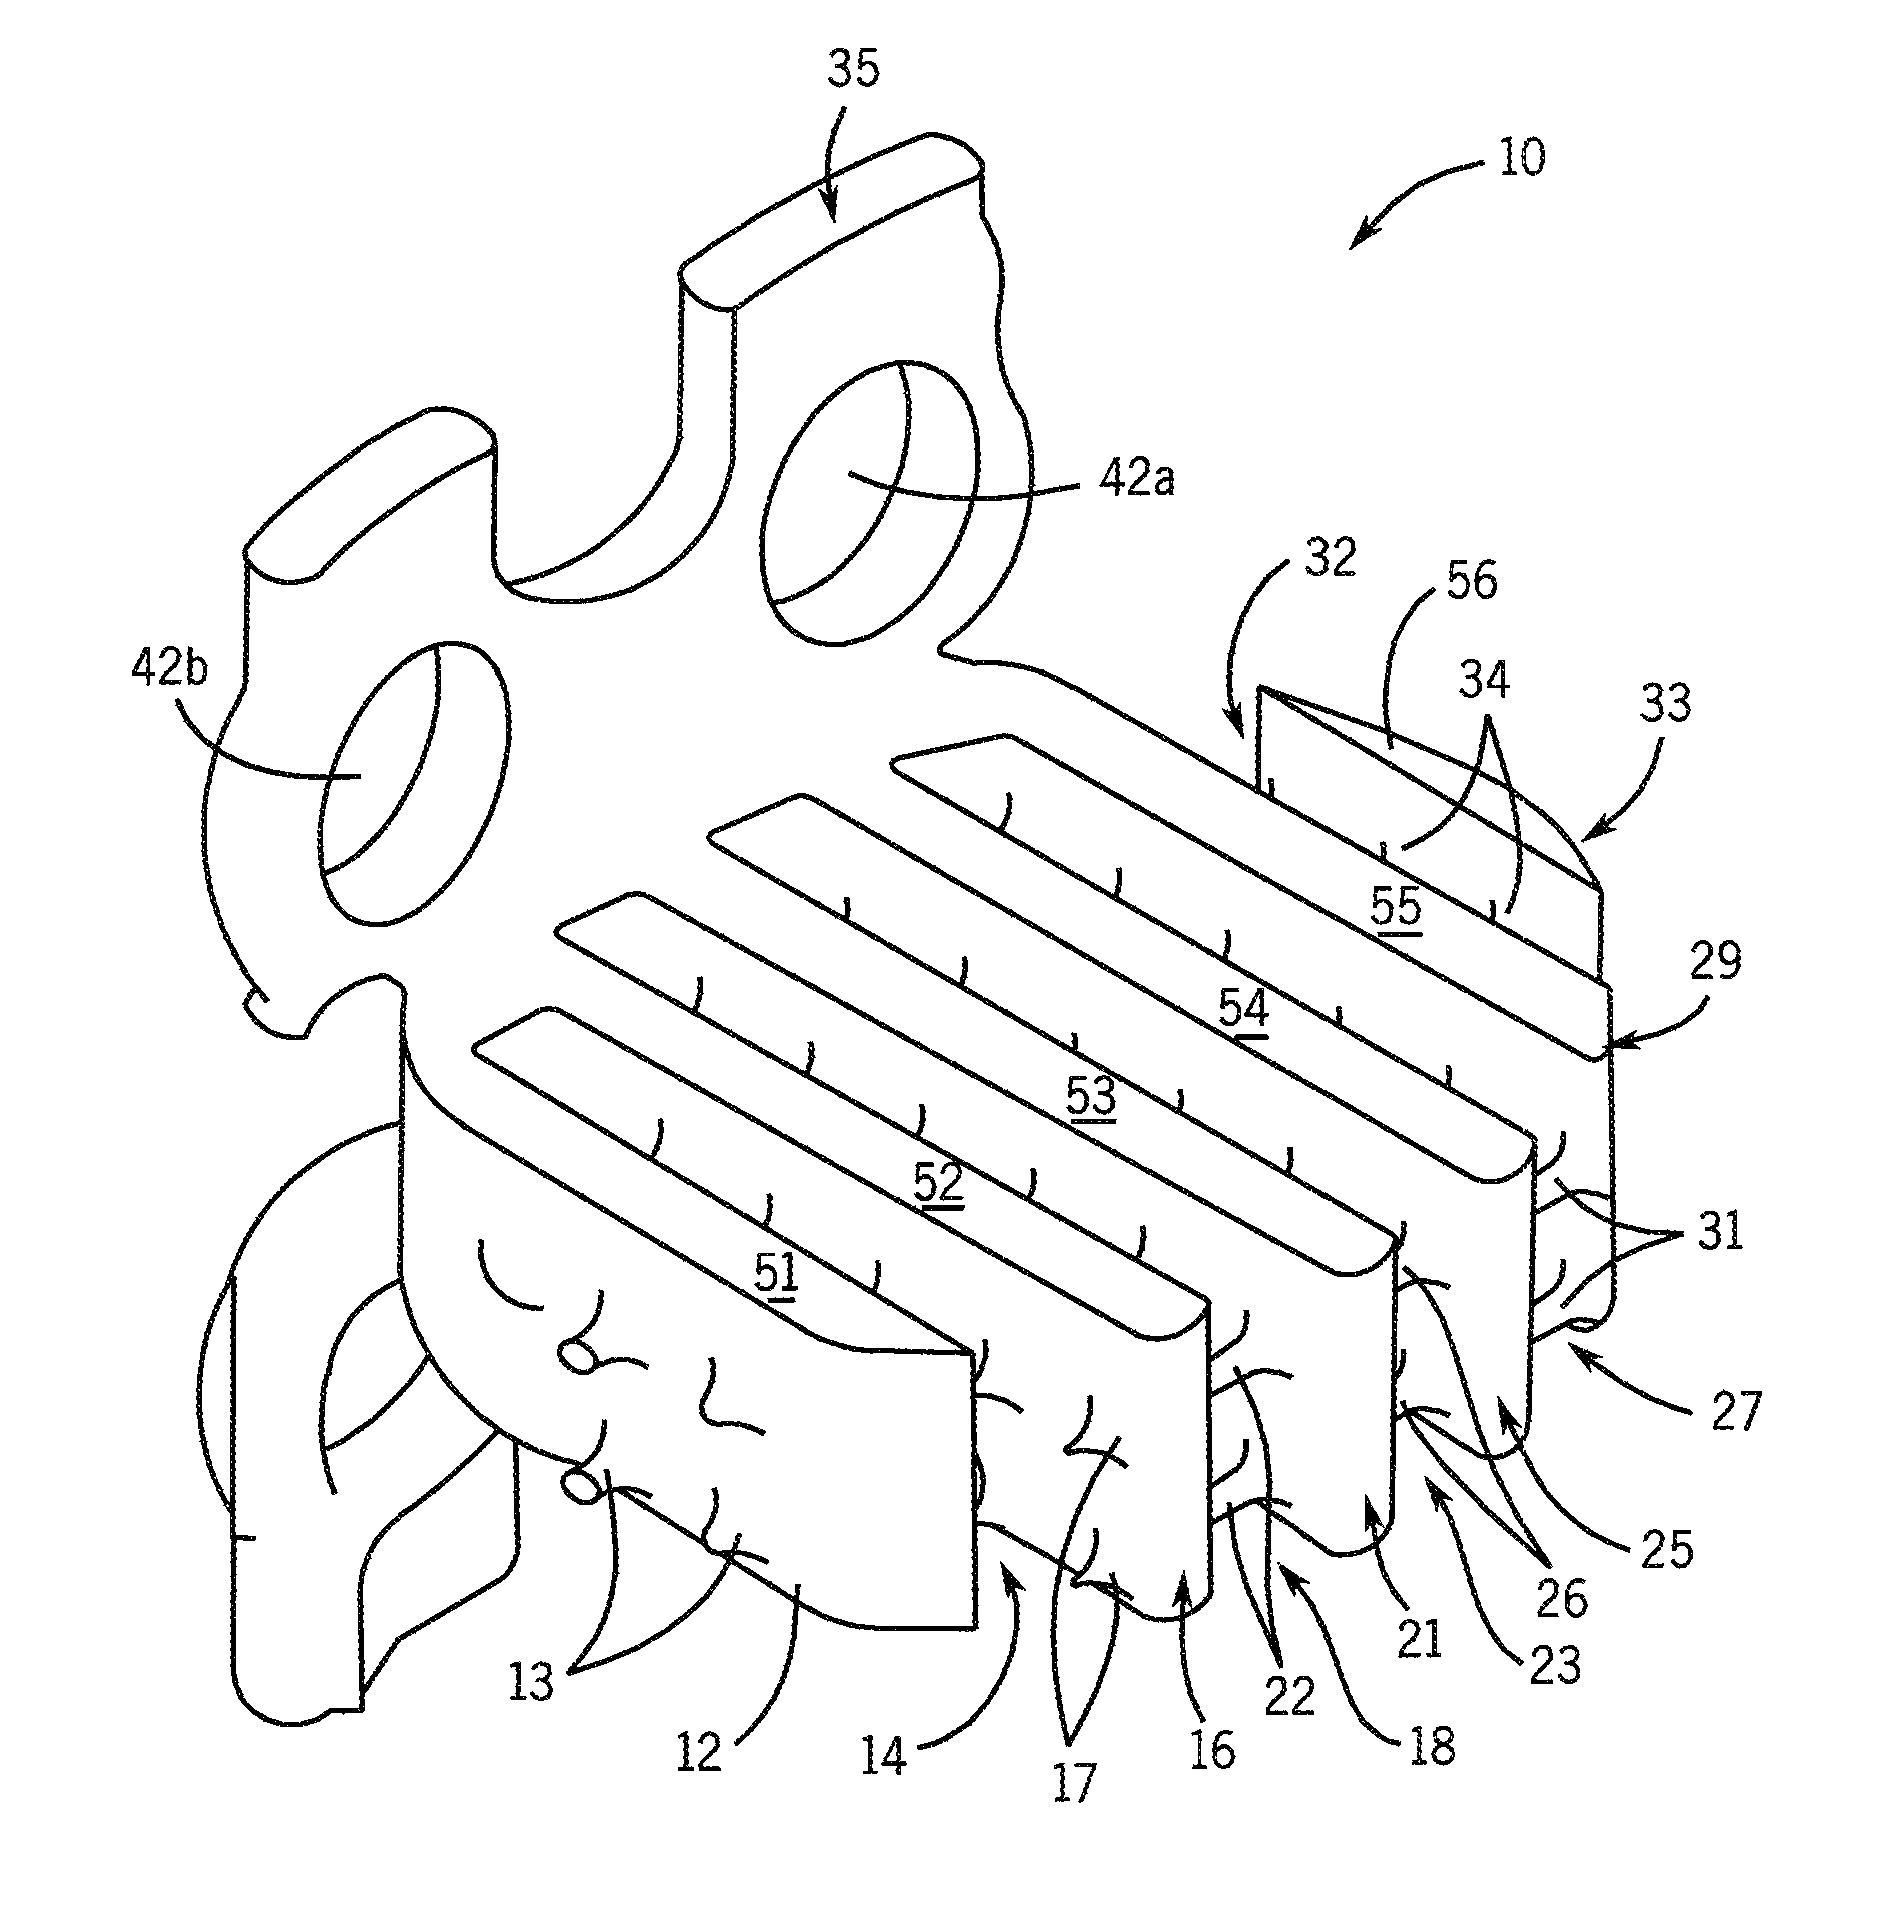 Degradable cage coated with mineral layers for spinal interbody fusion